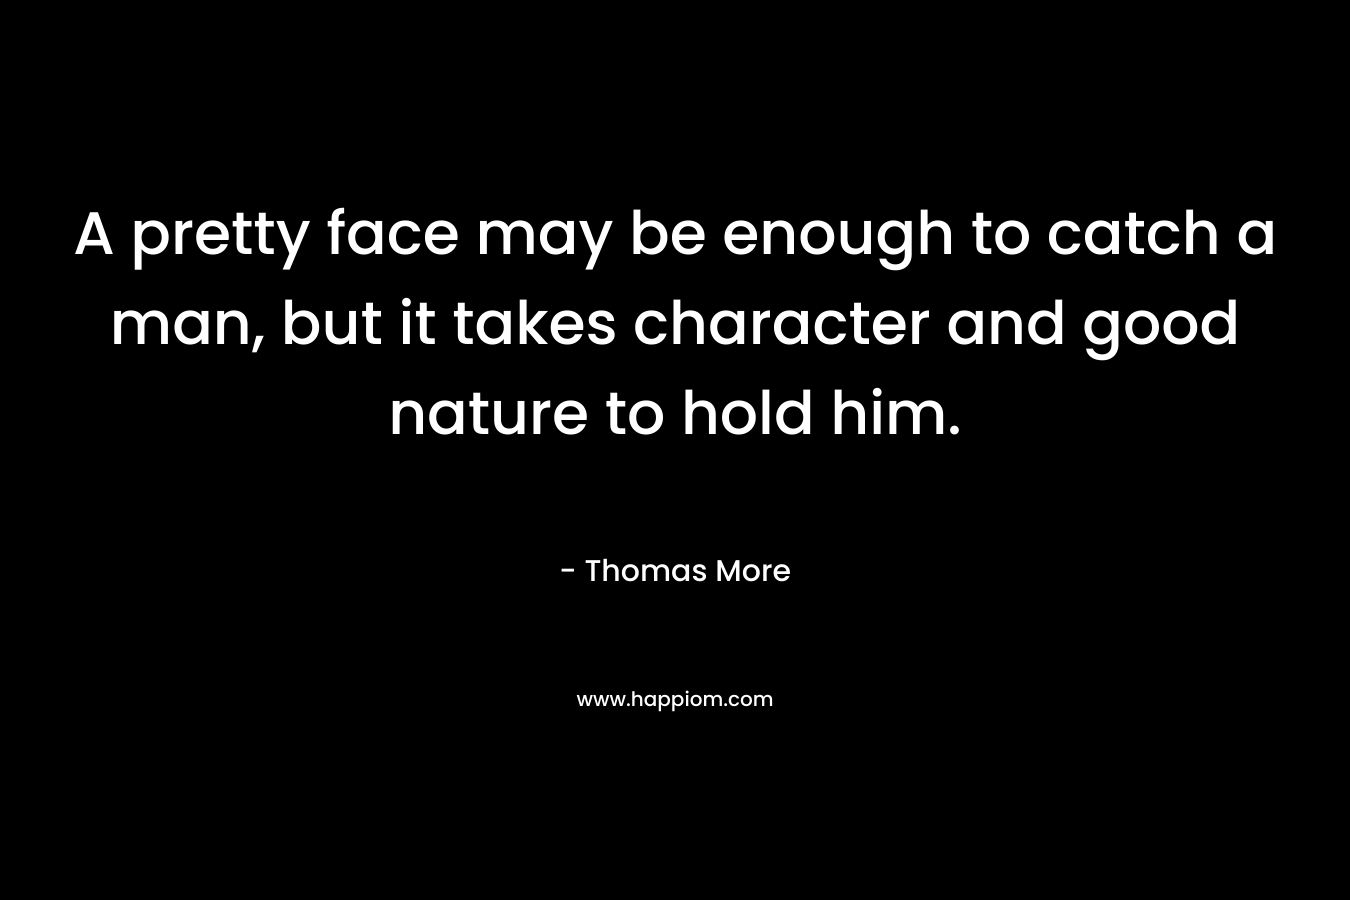 A pretty face may be enough to catch a man, but it takes character and good nature to hold him.